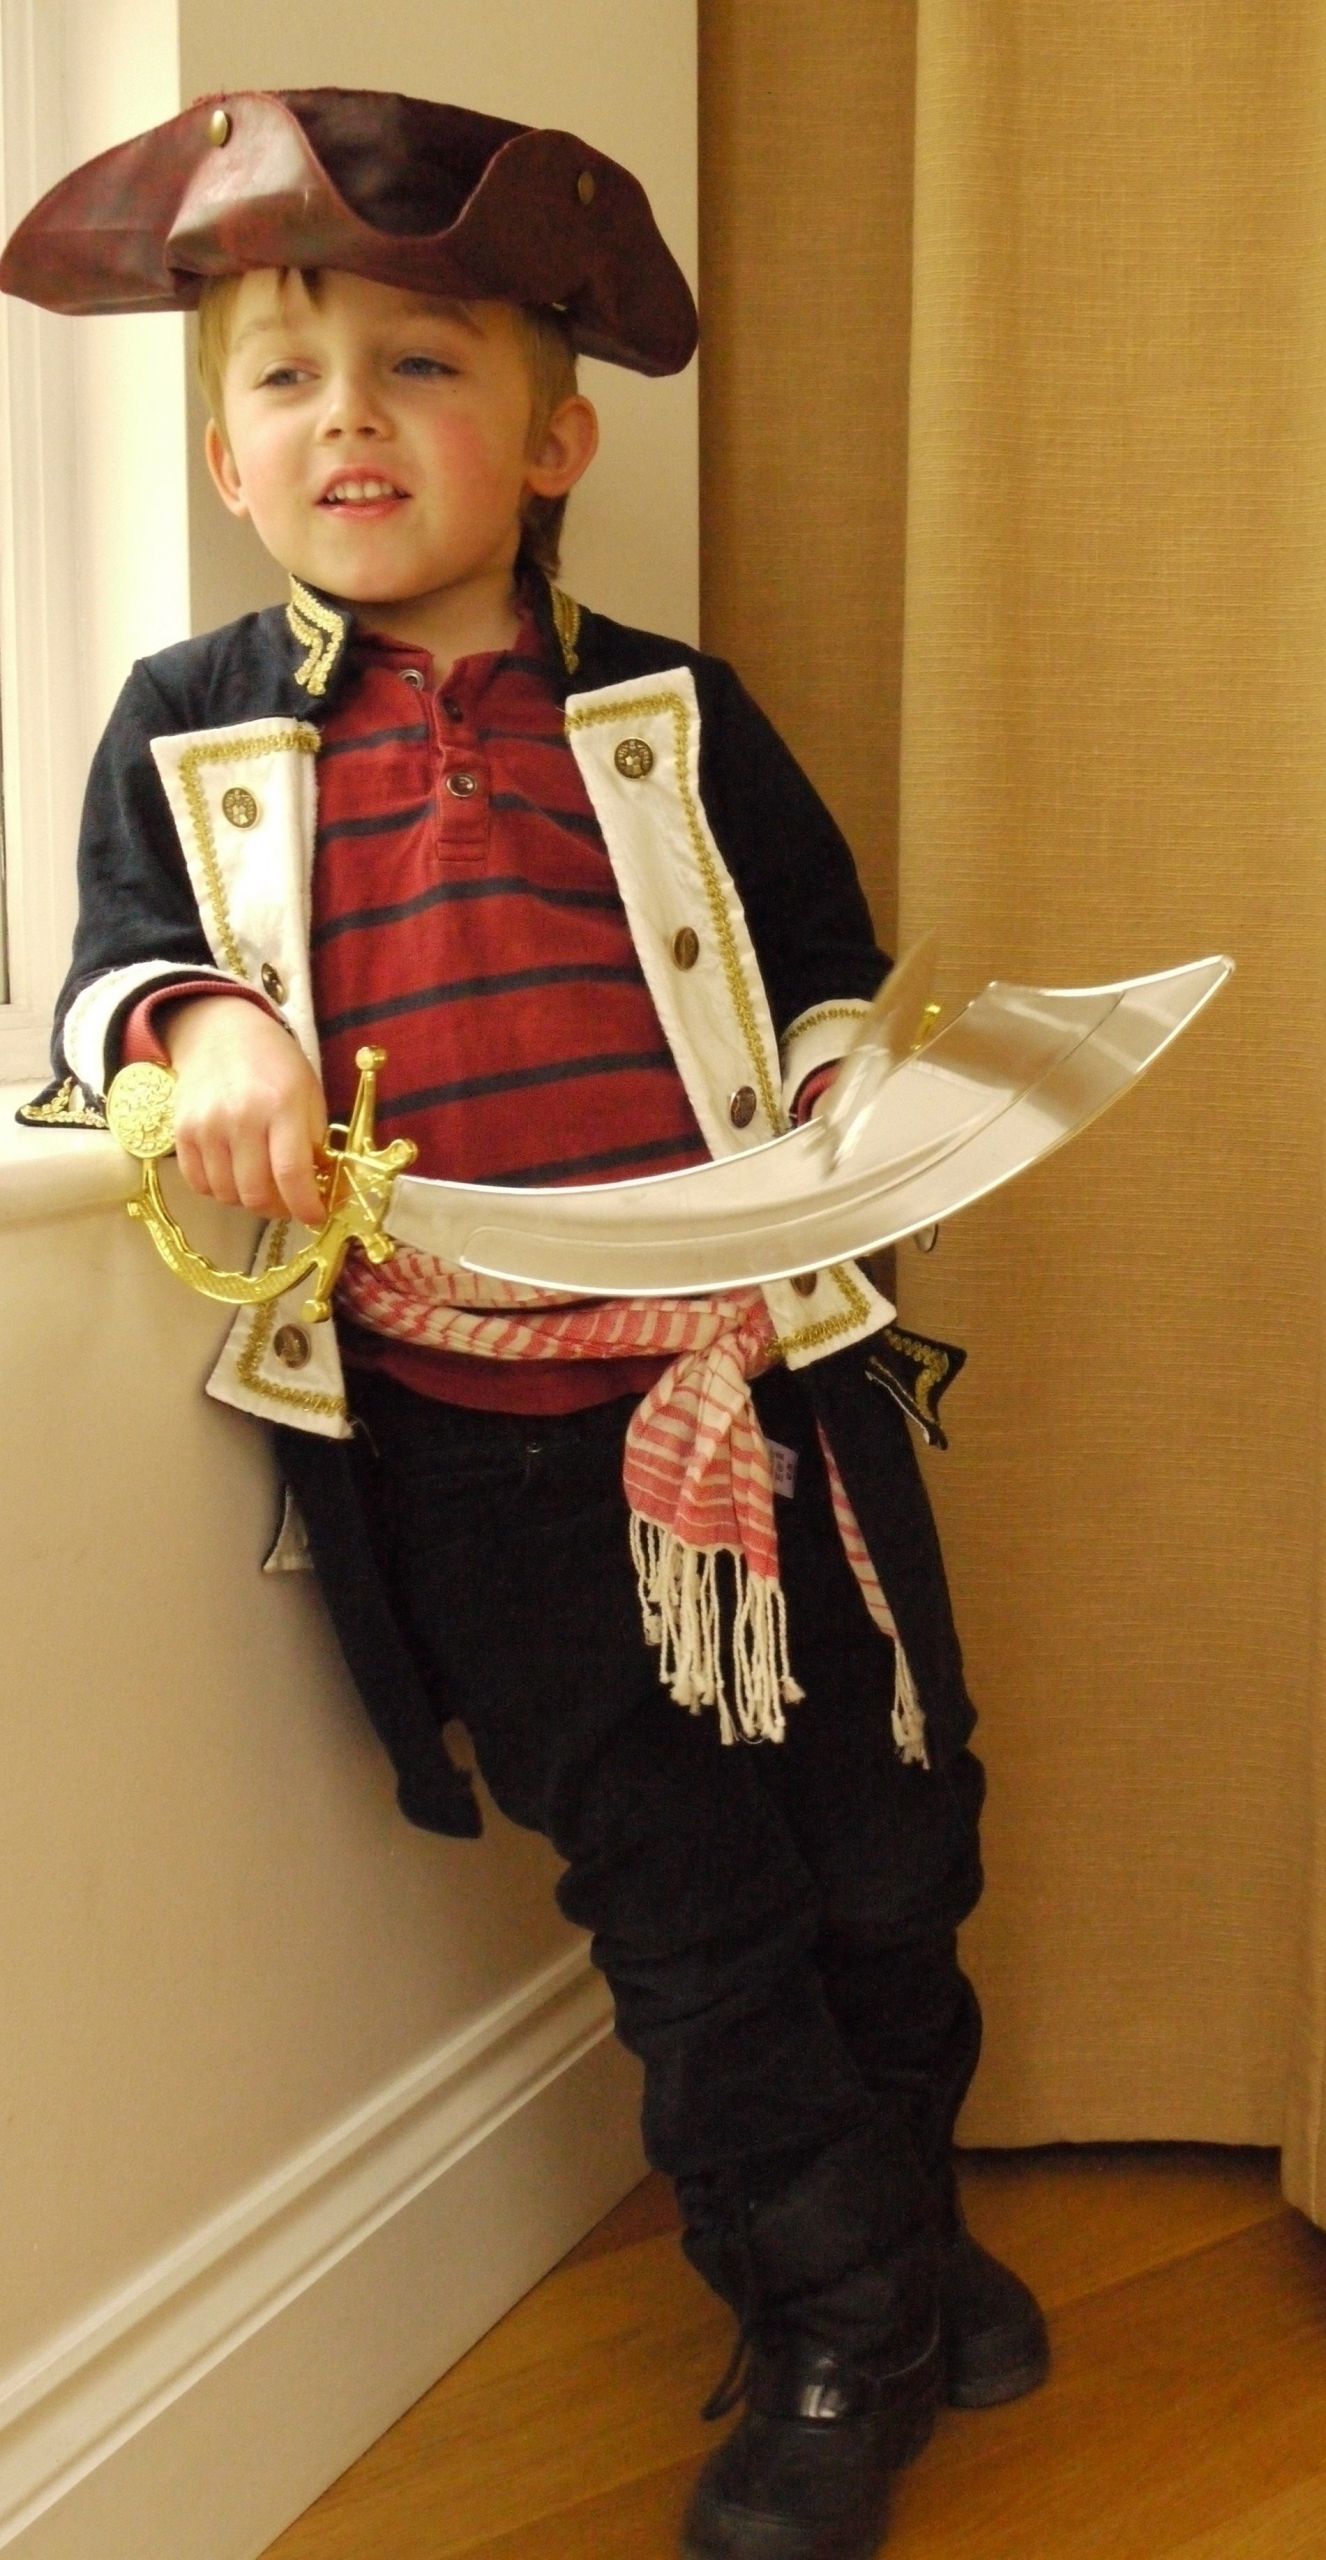 Toddler DIY Costumes
 10 Attractive Homemade Pirate Costume Ideas For Kids 2019